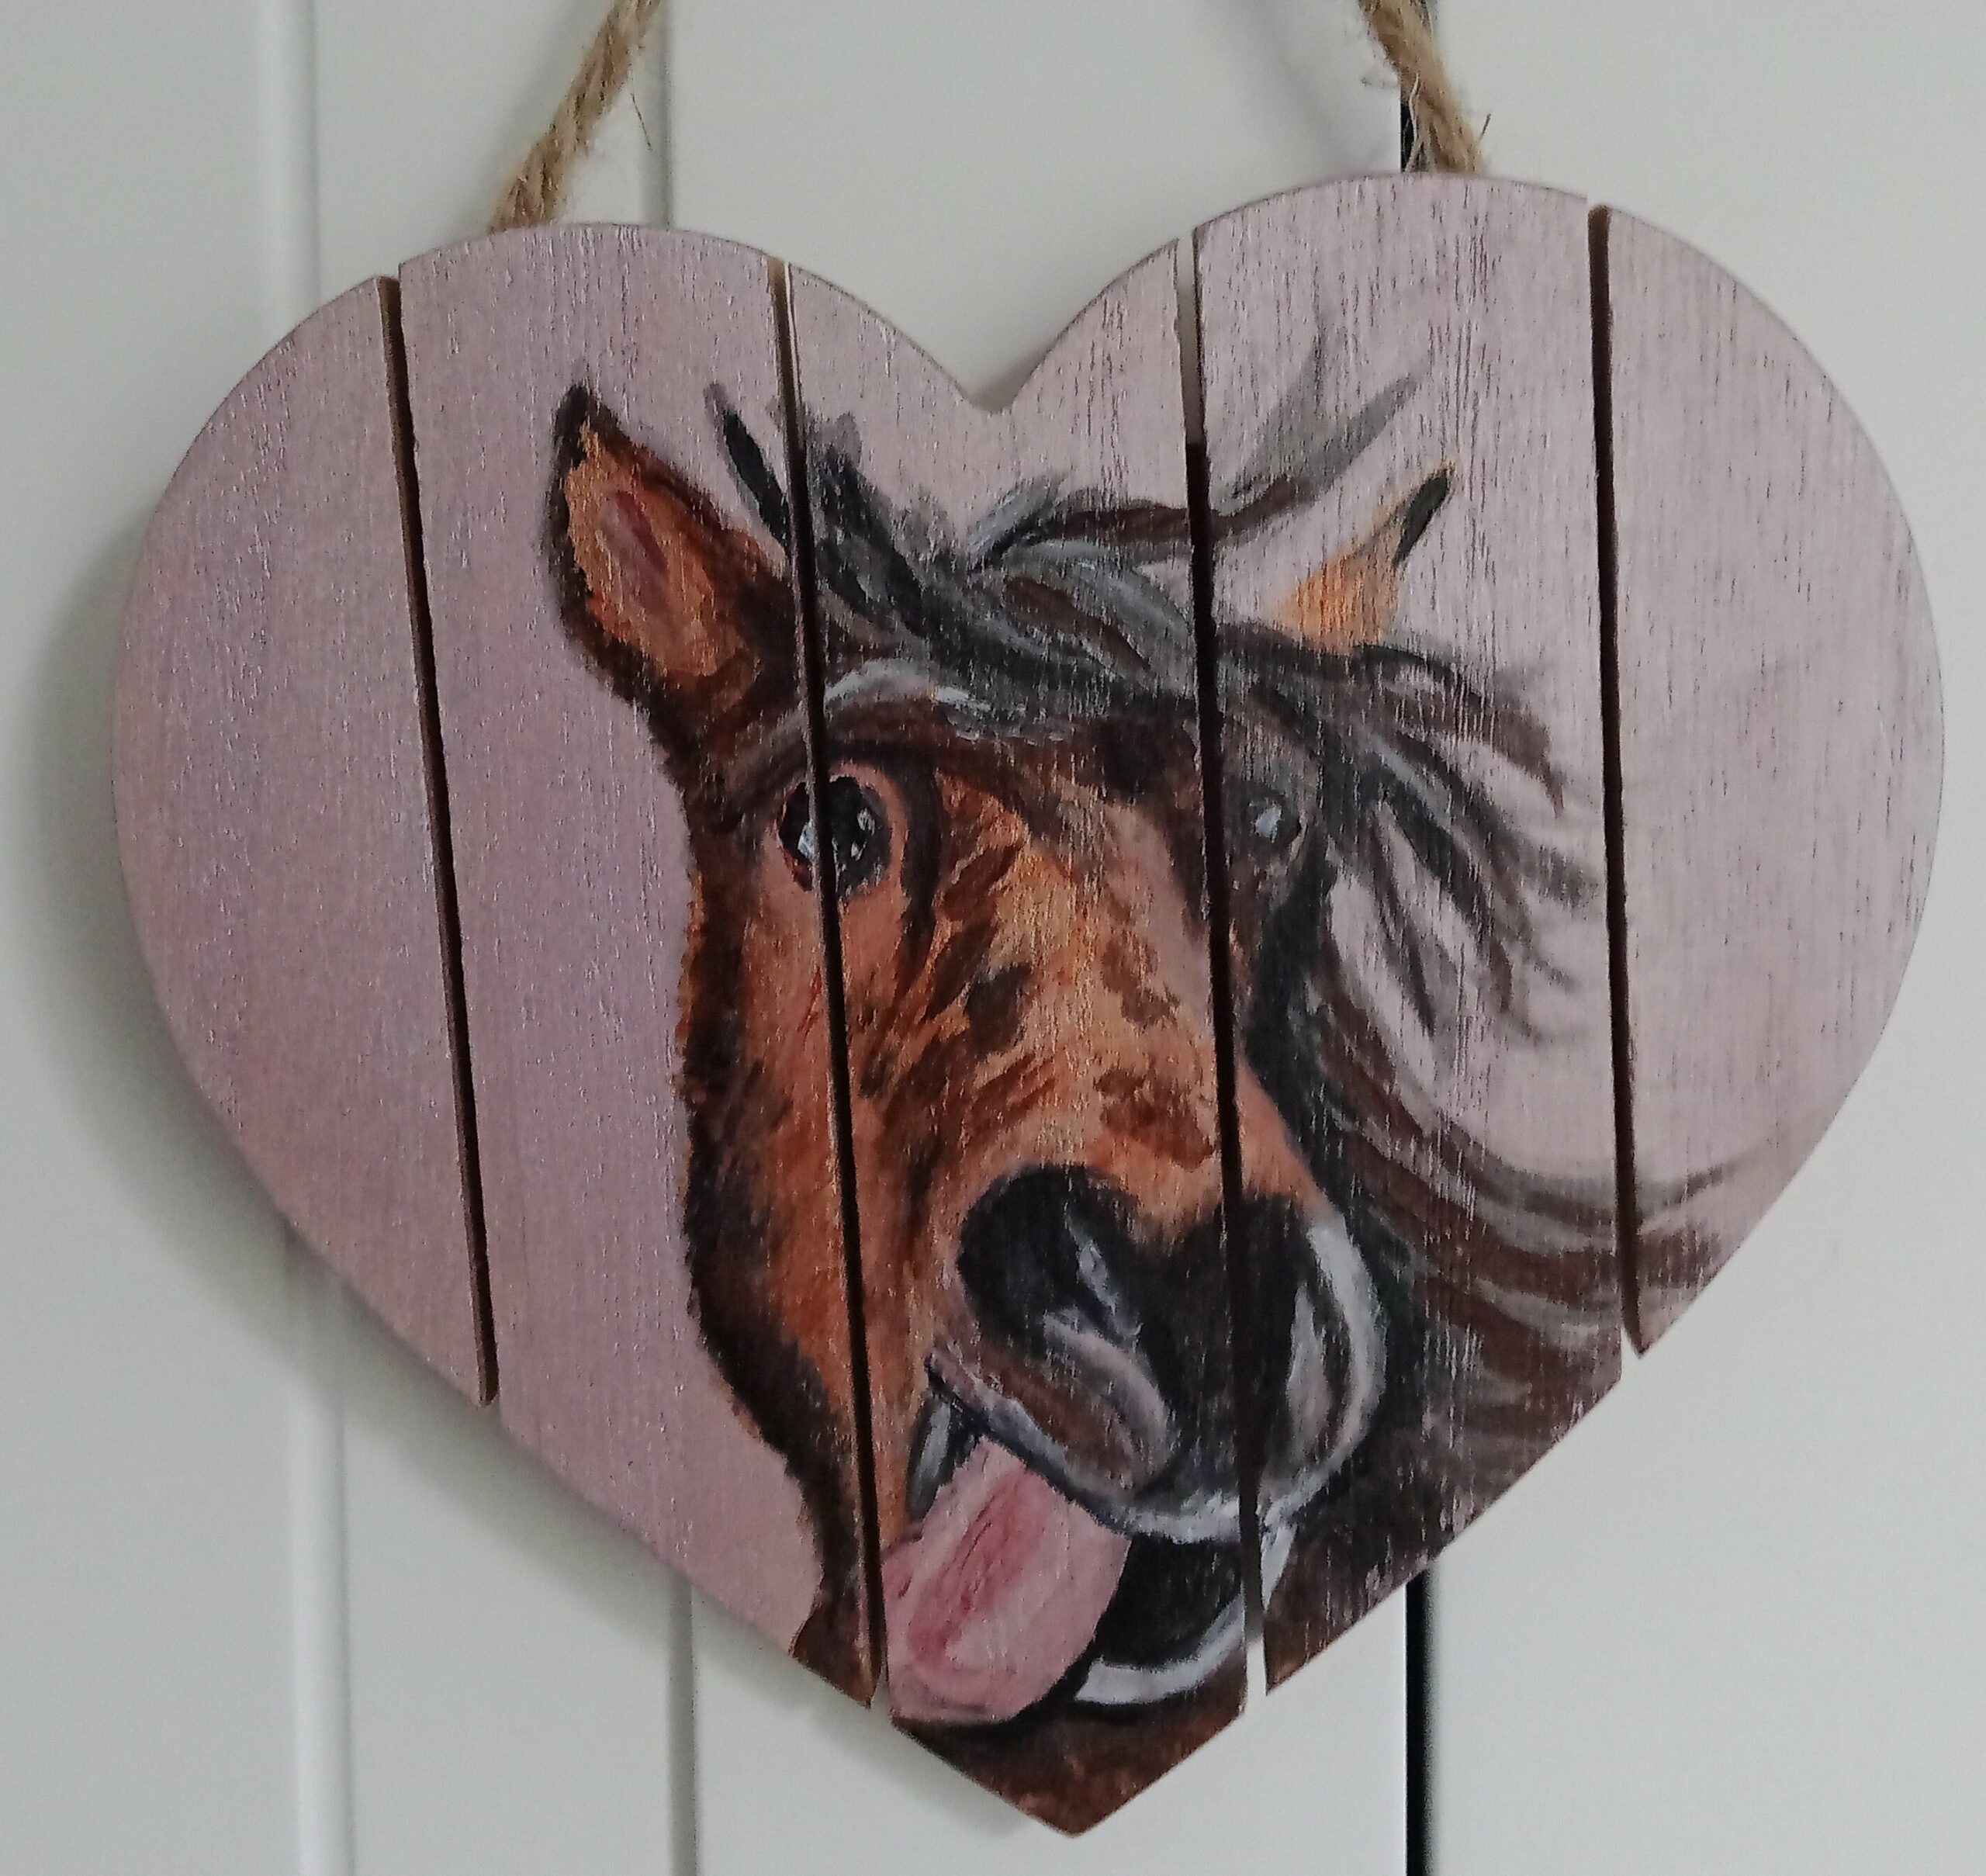 Painting of a horse on a wooden heart